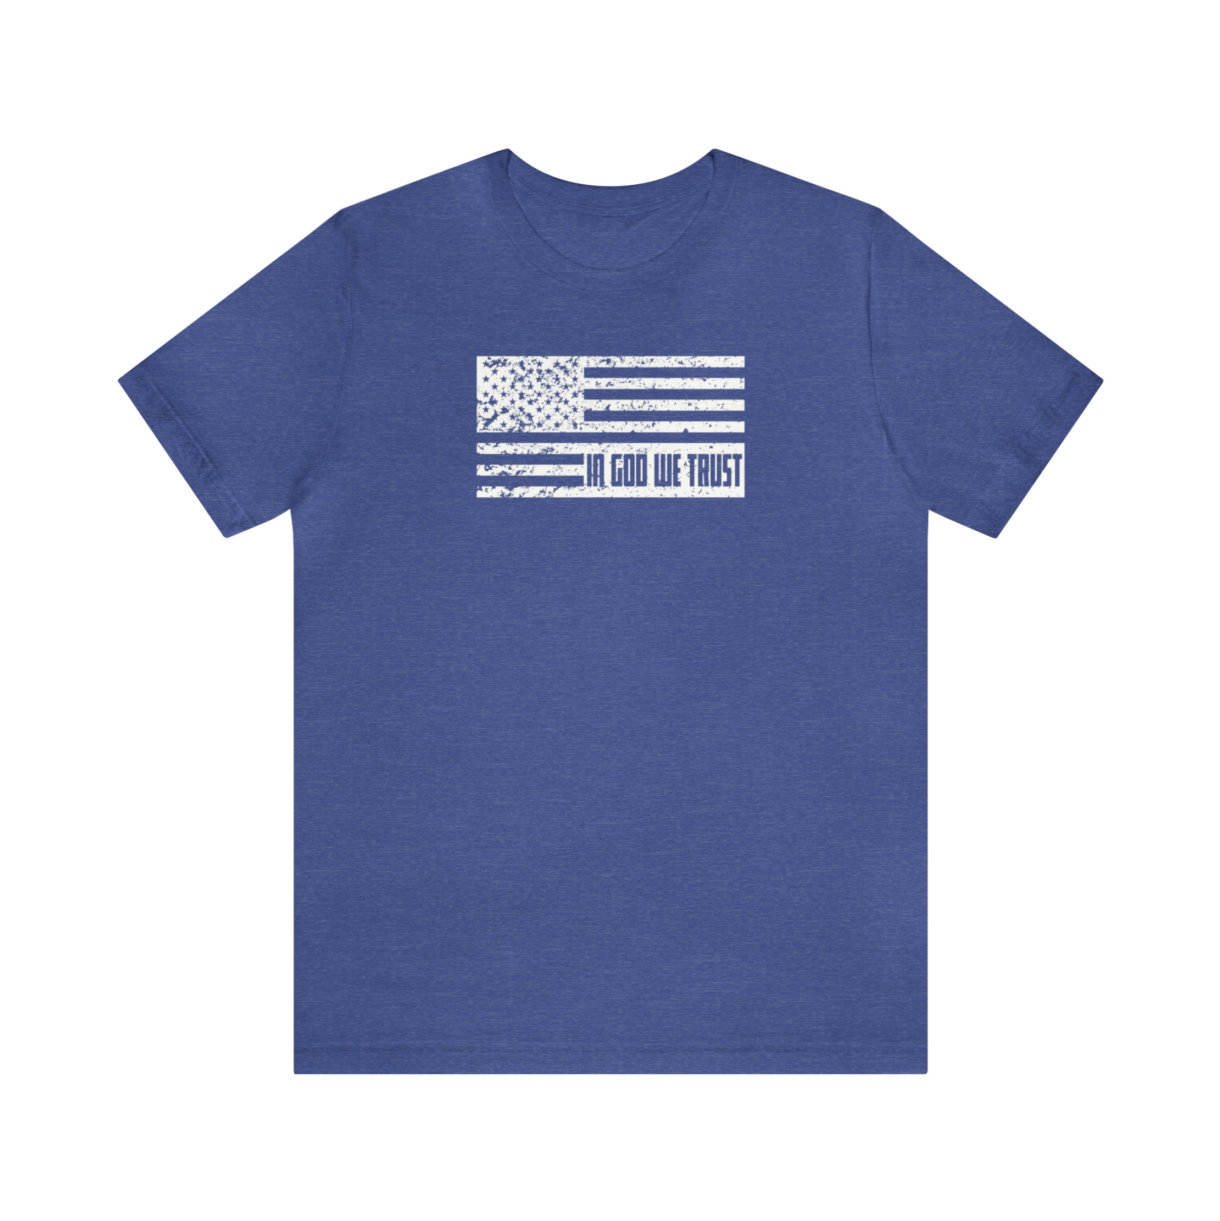 adult blue t shirt with flag in god we trust